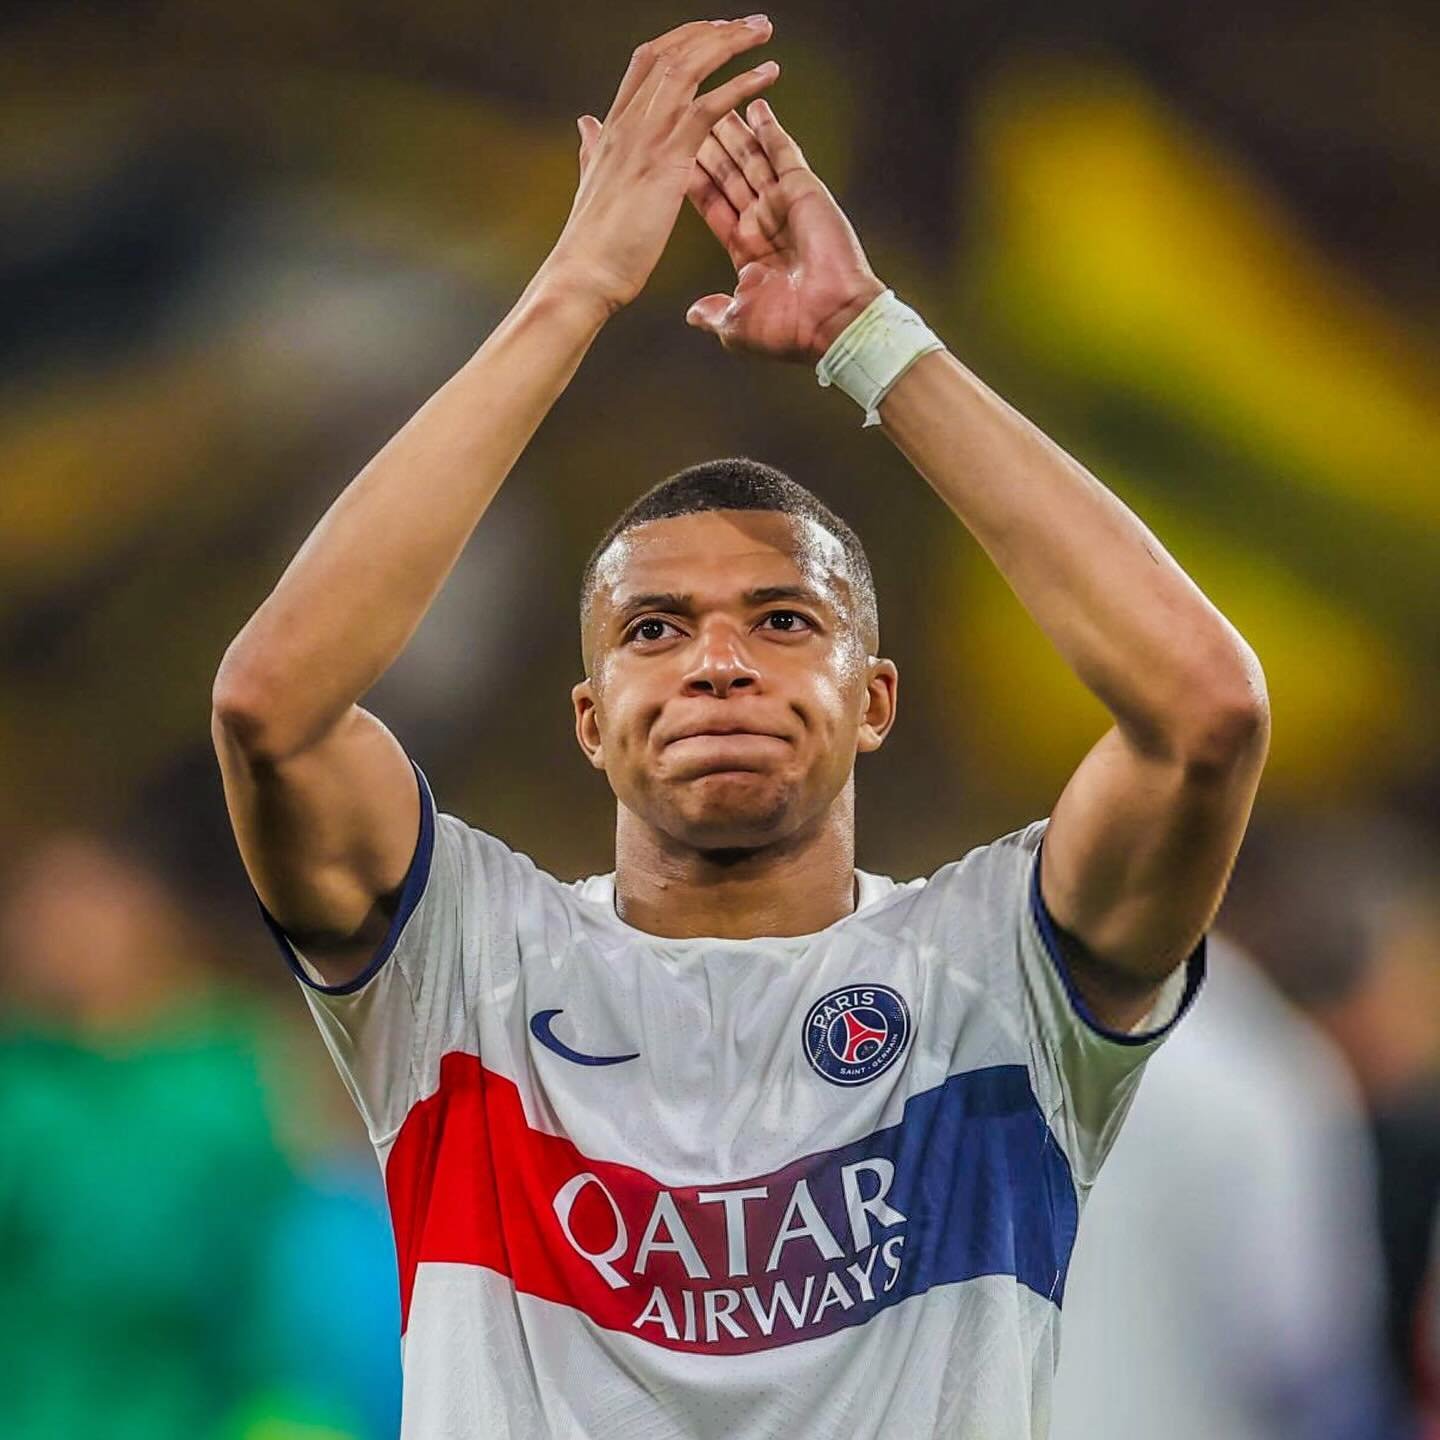 Kylian Mbapp&eacute; confirms he&rsquo;s leaving PSG at the end of the season. 

Real Madrid 🔜